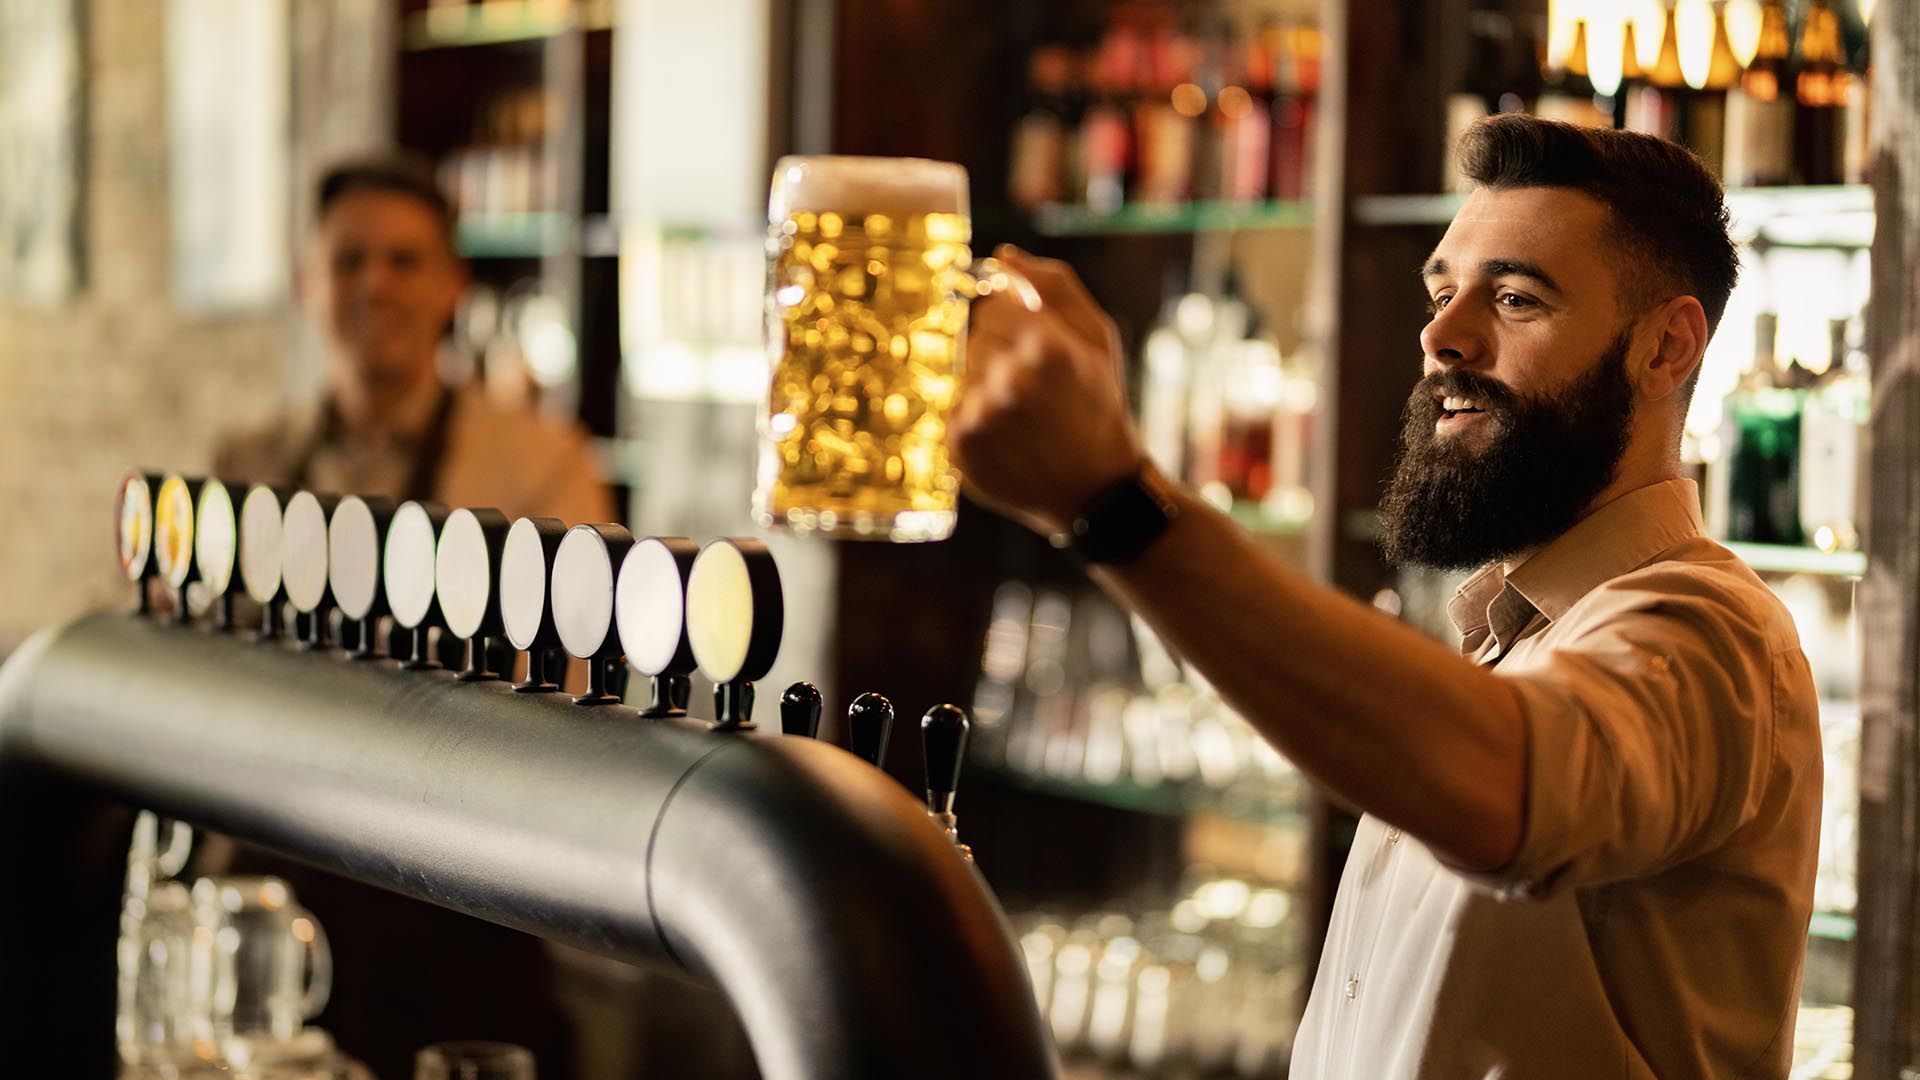 A Dad-tastic Guide to Gearing Up Your Bar/Restaurant for Father’s Day